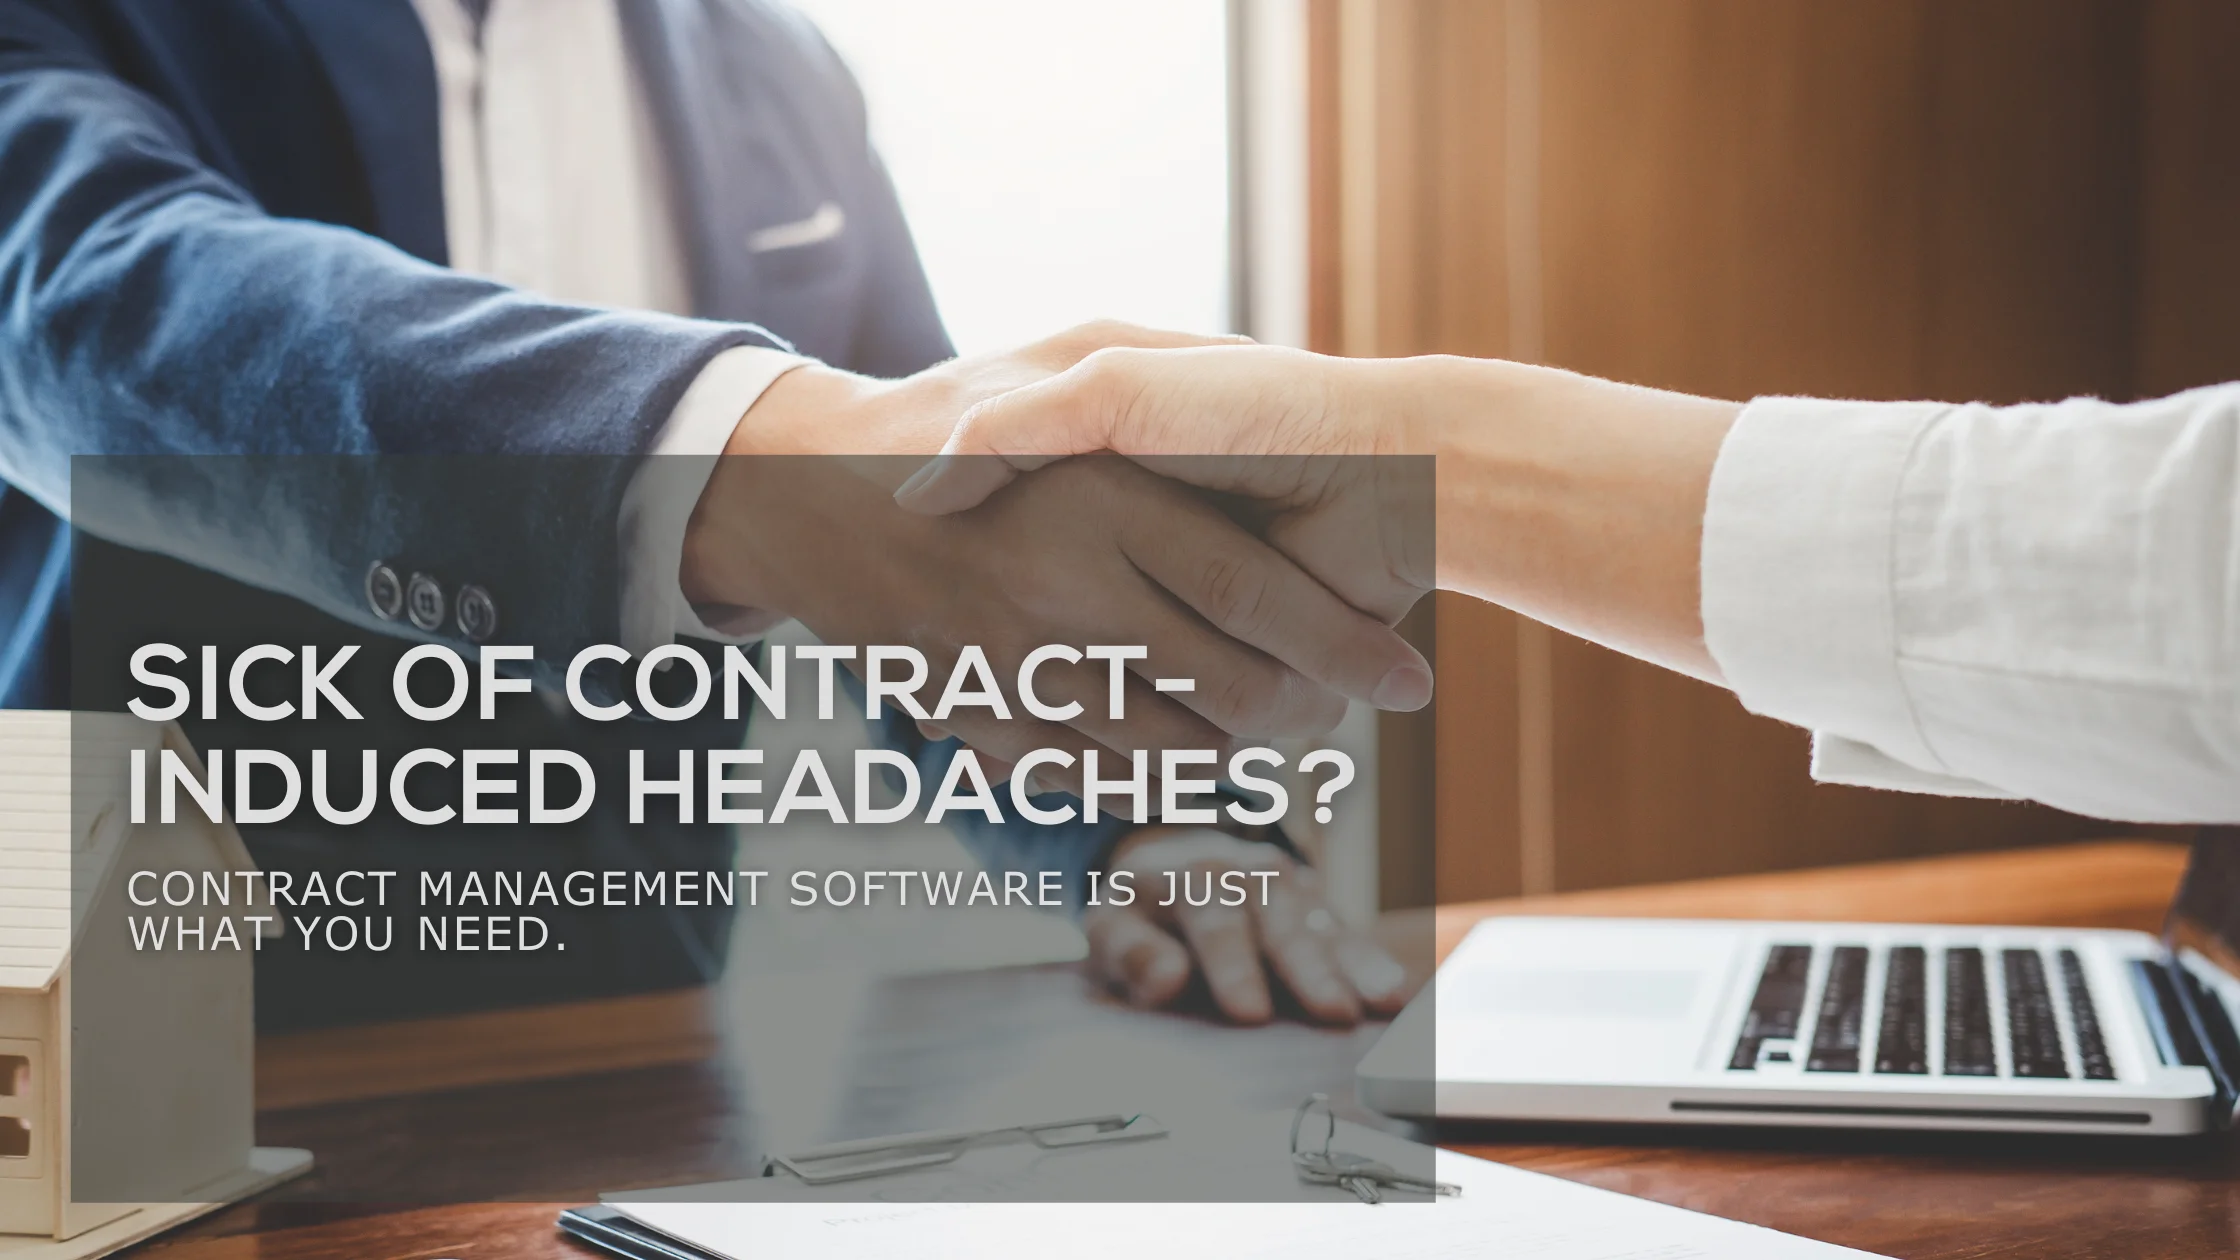 Sick of contract-induced headaches?